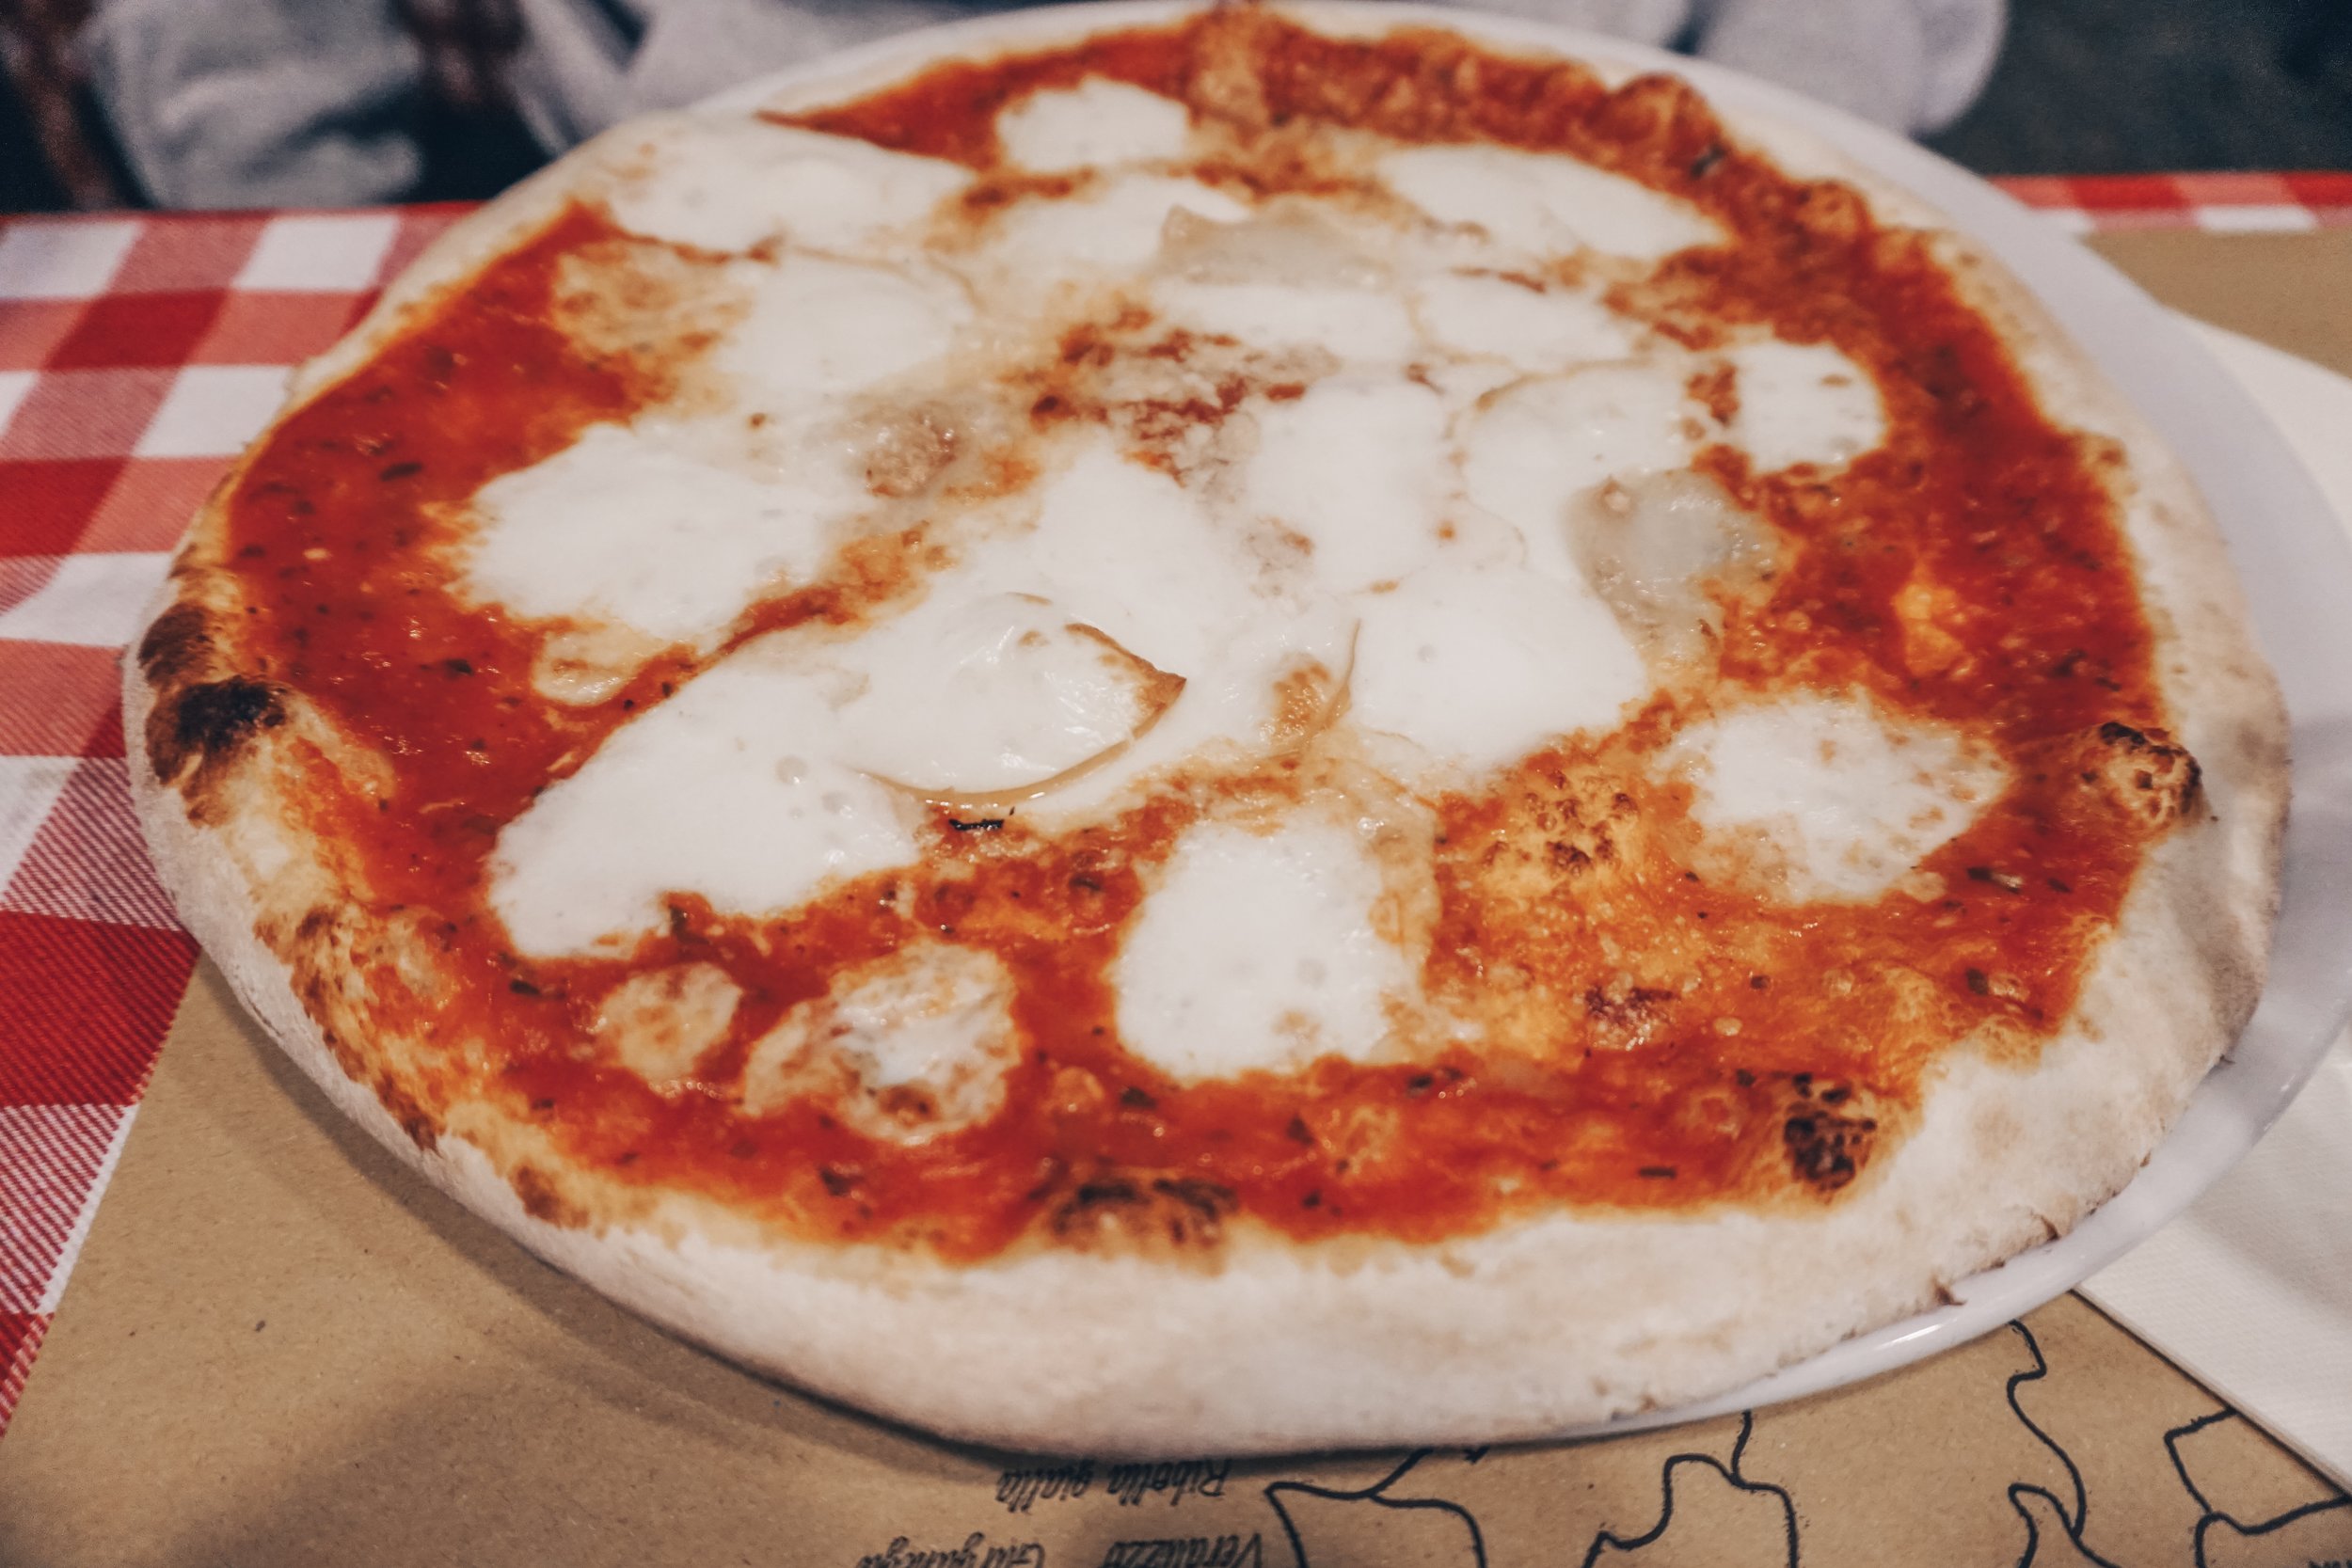 The Pizza looks like this and tastes even better. 